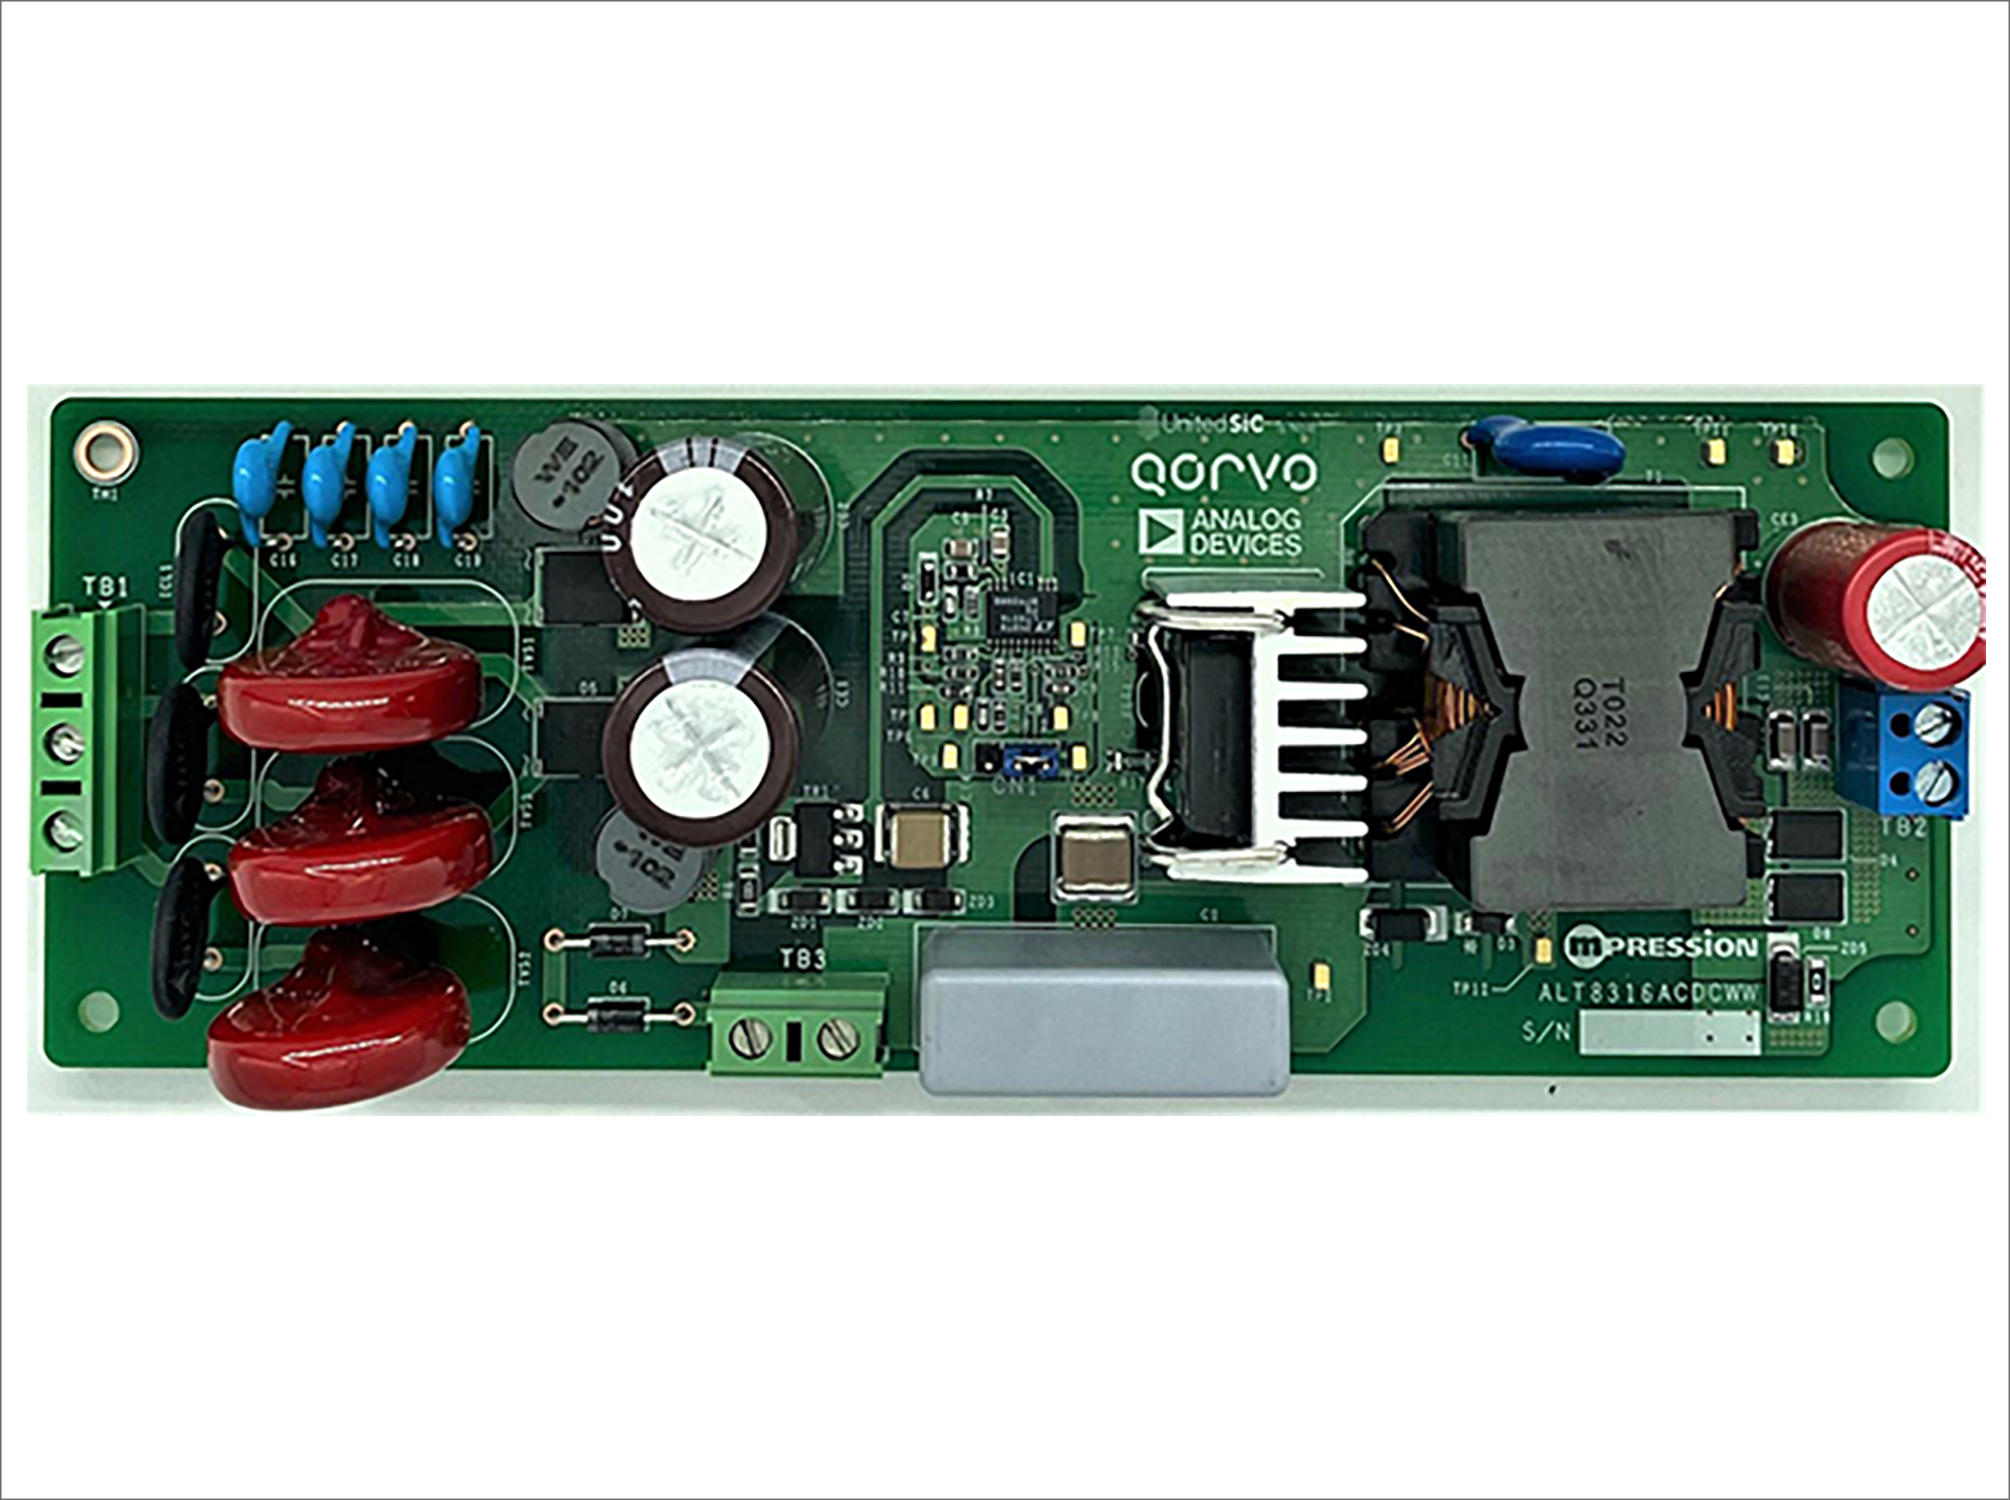 12V Output Isolated AC/DC (WW+JPN) Board with LT8316+SiC